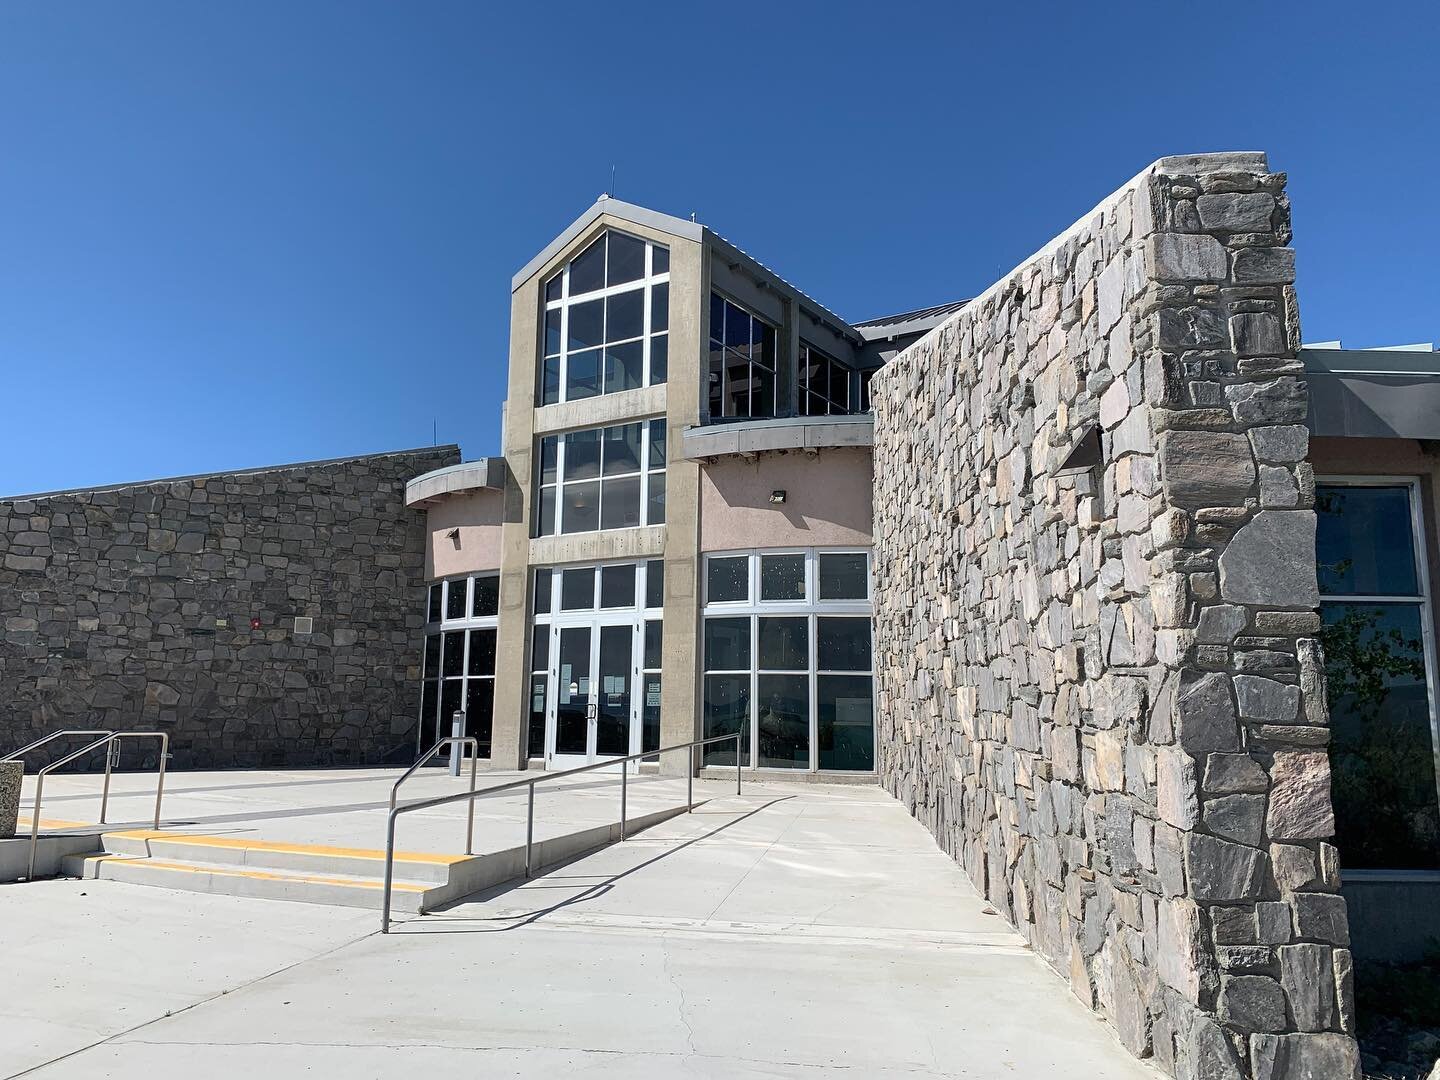 Project Highlight: Mono Basin Visitor Center ⛰

3CE provided M&amp;P engineering for a full HVAC replacement upgrade for this 13,350 square foot visitor center in Lee Vining, CA. Read more about the project details on our website! 

3ceng.com/blog/mo